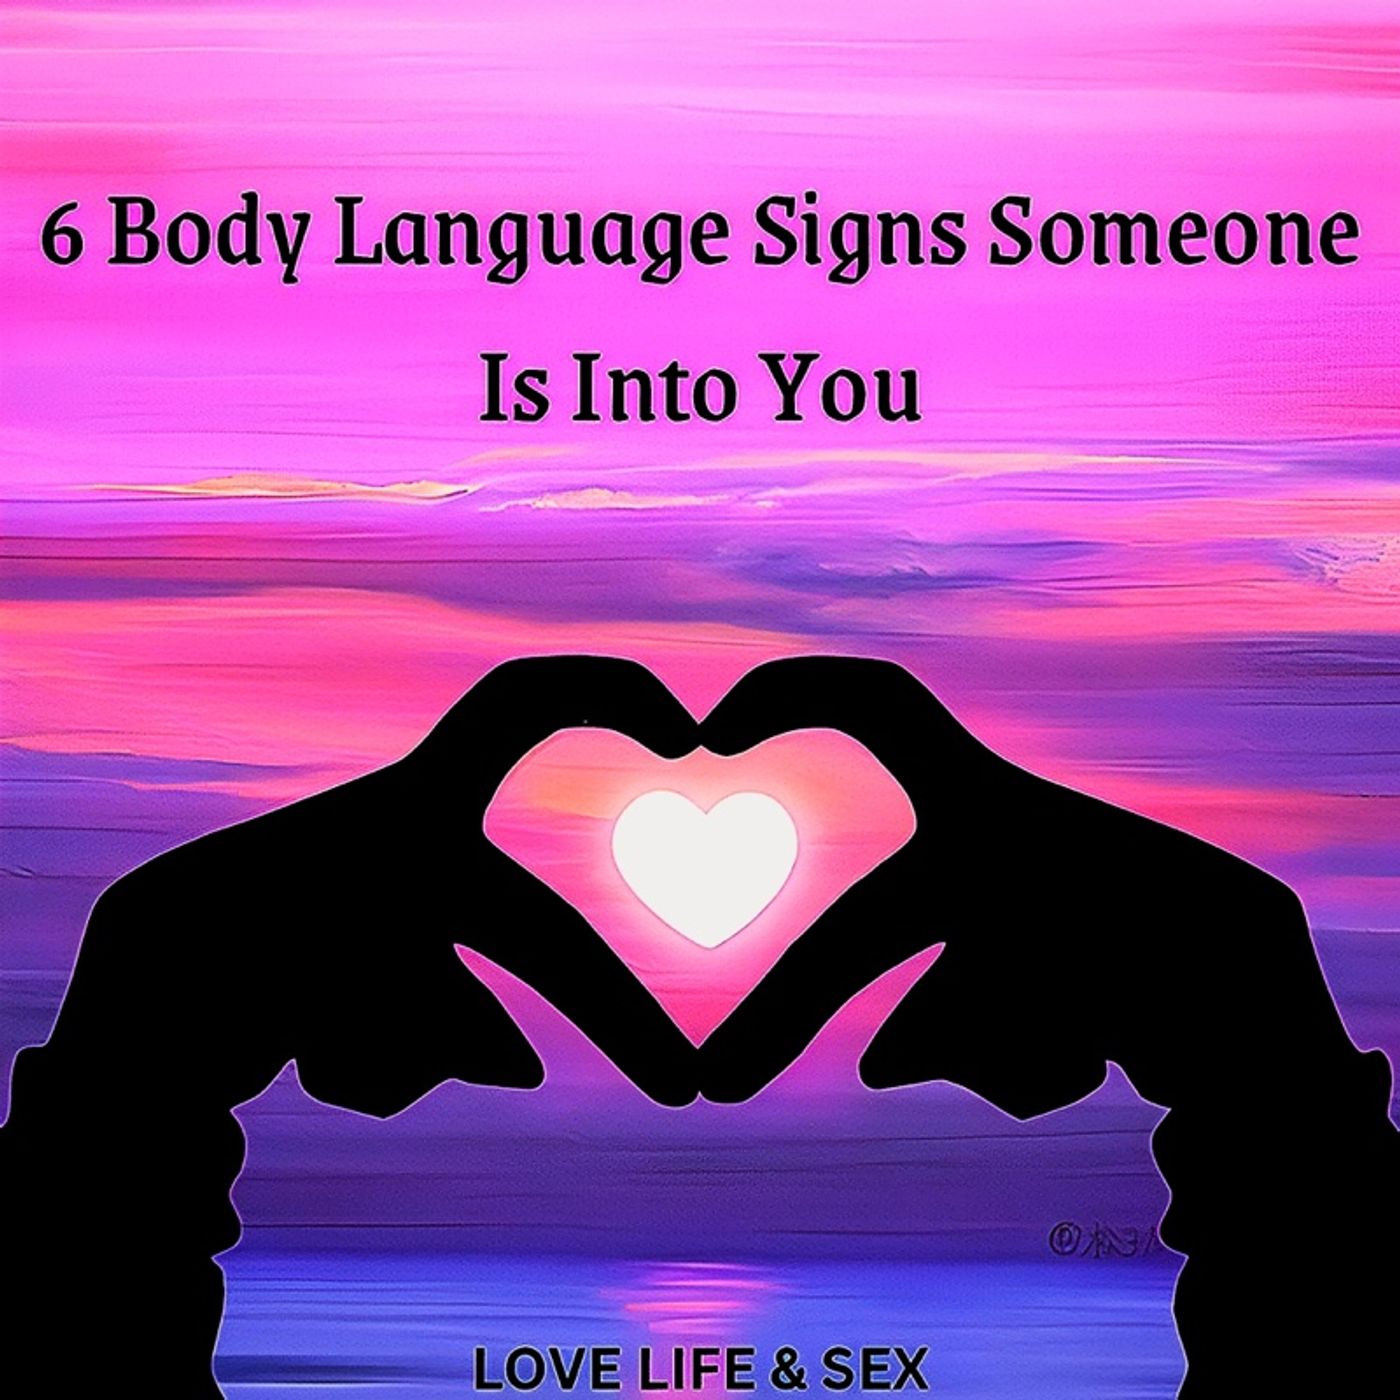 6 Body Language Signs Someone Is Into You 😊